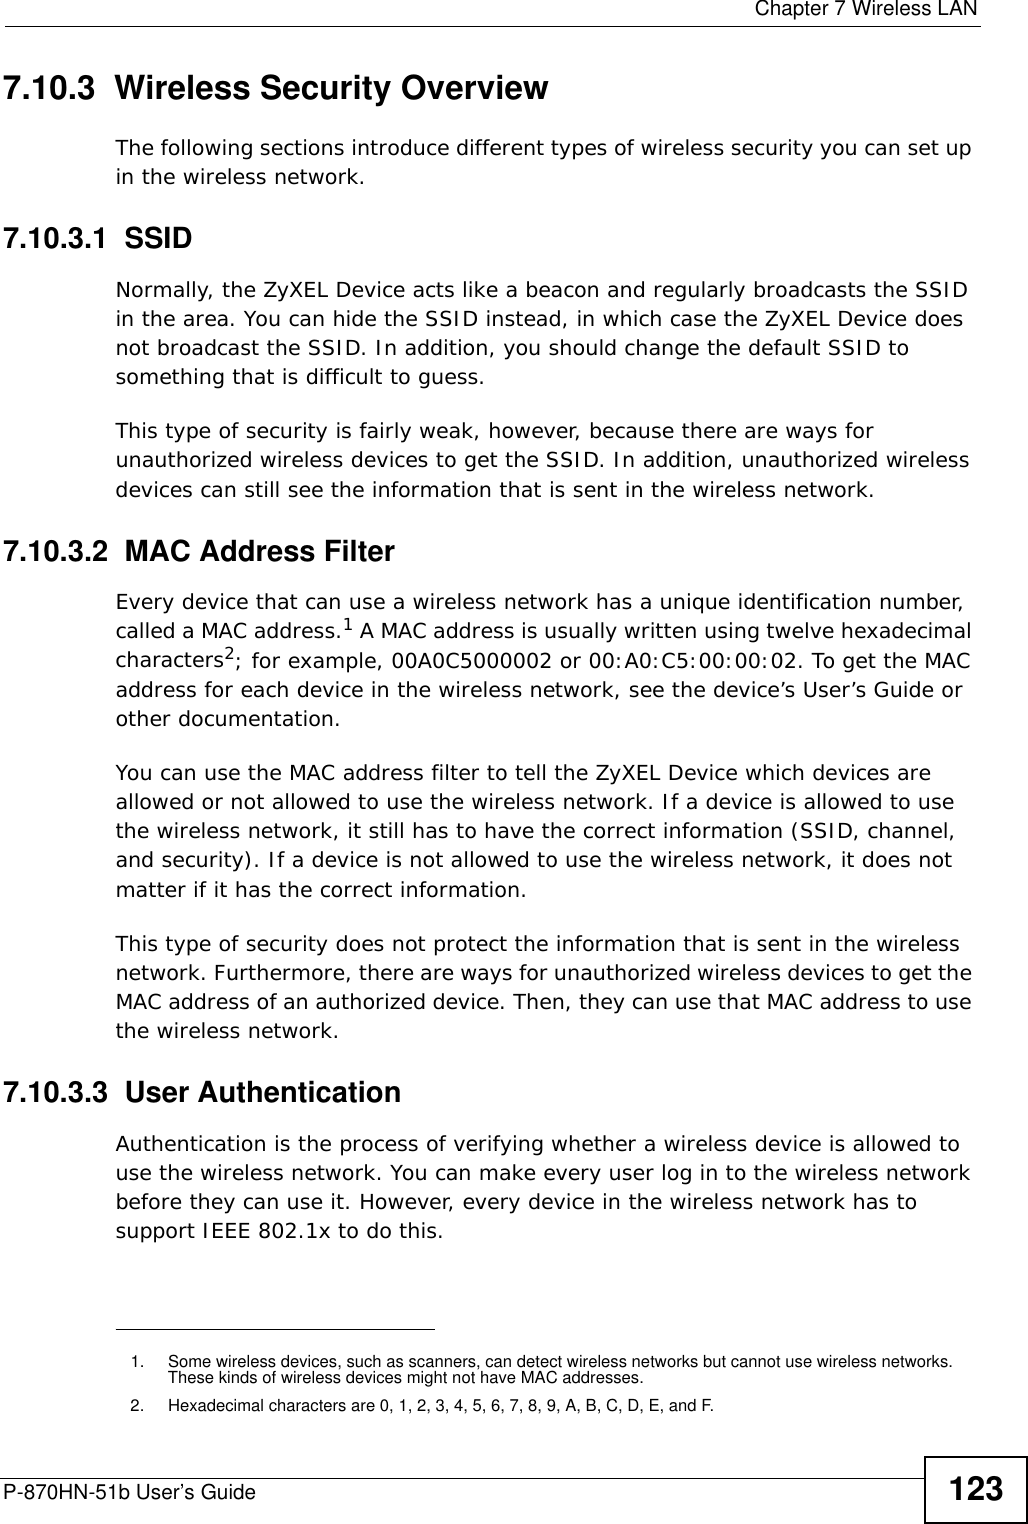  Chapter 7 Wireless LANP-870HN-51b User’s Guide 1237.10.3  Wireless Security OverviewThe following sections introduce different types of wireless security you can set up in the wireless network.7.10.3.1  SSIDNormally, the ZyXEL Device acts like a beacon and regularly broadcasts the SSID in the area. You can hide the SSID instead, in which case the ZyXEL Device does not broadcast the SSID. In addition, you should change the default SSID to something that is difficult to guess.This type of security is fairly weak, however, because there are ways for unauthorized wireless devices to get the SSID. In addition, unauthorized wireless devices can still see the information that is sent in the wireless network.7.10.3.2  MAC Address FilterEvery device that can use a wireless network has a unique identification number, called a MAC address.1 A MAC address is usually written using twelve hexadecimal characters2; for example, 00A0C5000002 or 00:A0:C5:00:00:02. To get the MAC address for each device in the wireless network, see the device’s User’s Guide or other documentation.You can use the MAC address filter to tell the ZyXEL Device which devices are allowed or not allowed to use the wireless network. If a device is allowed to use the wireless network, it still has to have the correct information (SSID, channel, and security). If a device is not allowed to use the wireless network, it does not matter if it has the correct information.This type of security does not protect the information that is sent in the wireless network. Furthermore, there are ways for unauthorized wireless devices to get the MAC address of an authorized device. Then, they can use that MAC address to use the wireless network.7.10.3.3  User AuthenticationAuthentication is the process of verifying whether a wireless device is allowed to use the wireless network. You can make every user log in to the wireless network before they can use it. However, every device in the wireless network has to support IEEE 802.1x to do this.1. Some wireless devices, such as scanners, can detect wireless networks but cannot use wireless networks. These kinds of wireless devices might not have MAC addresses.2. Hexadecimal characters are 0, 1, 2, 3, 4, 5, 6, 7, 8, 9, A, B, C, D, E, and F.